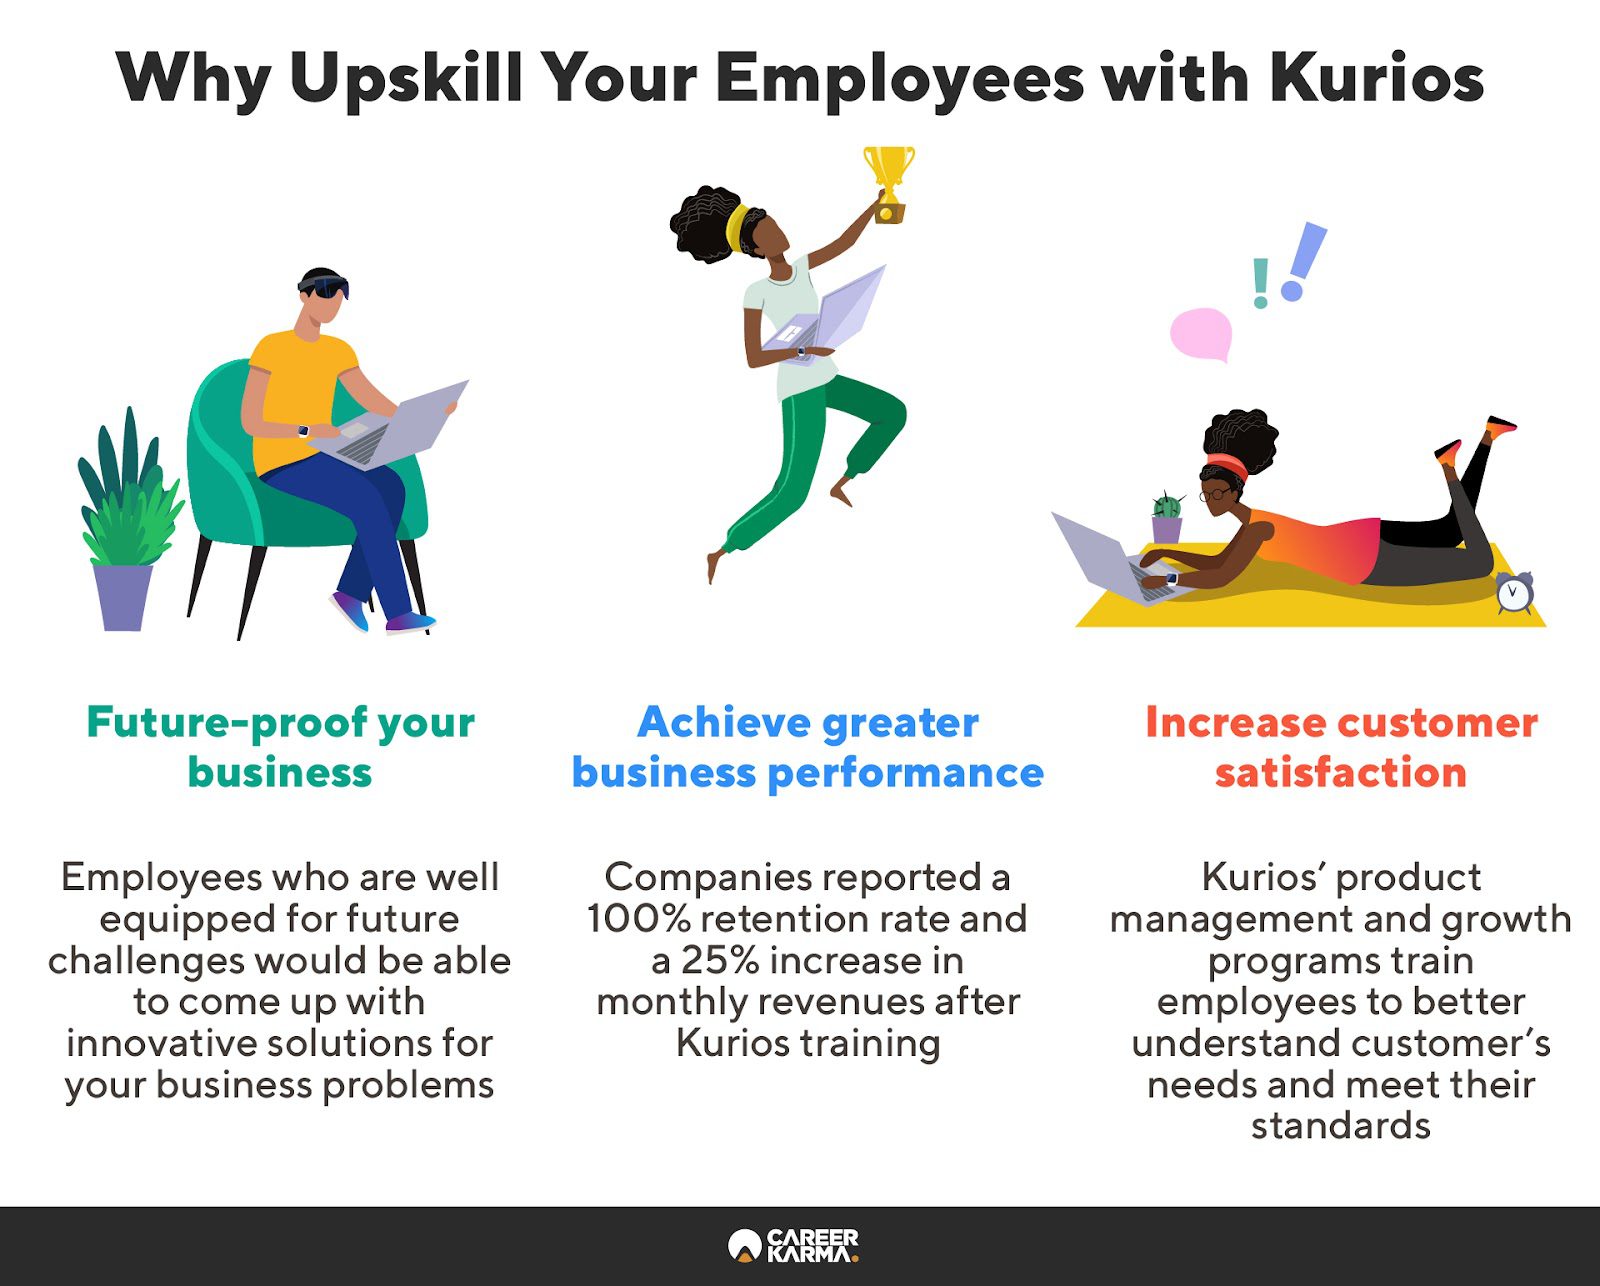 Infographic highlighting several reasons why businesses should upskill their employees with Kurios